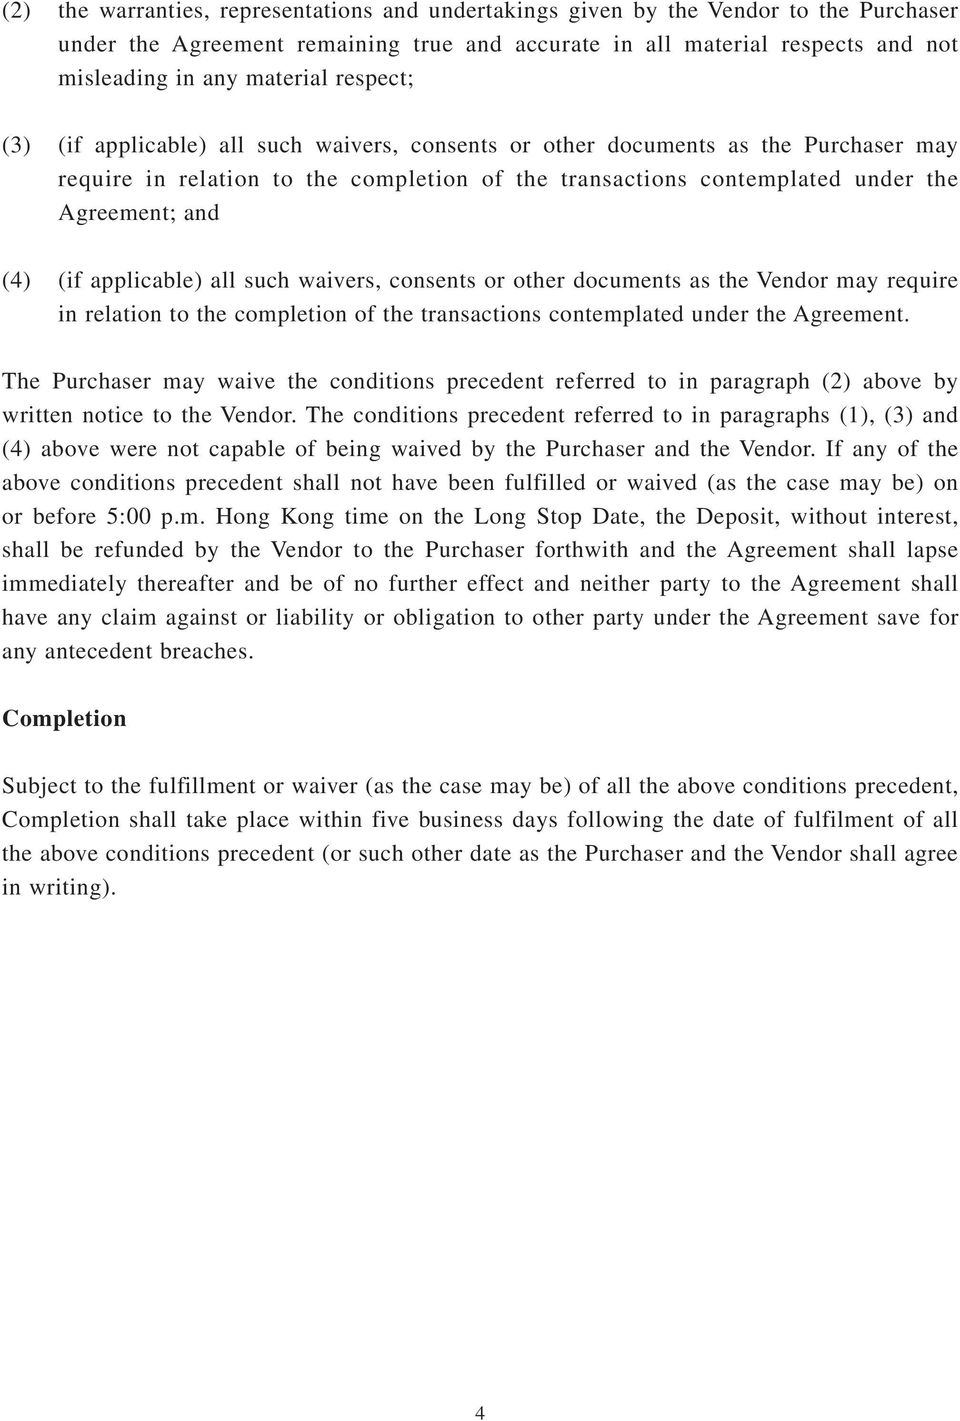 applicable) all such waivers, consents or other documents as the Vendor may require in relation to the completion of the transactions contemplated under the Agreement.